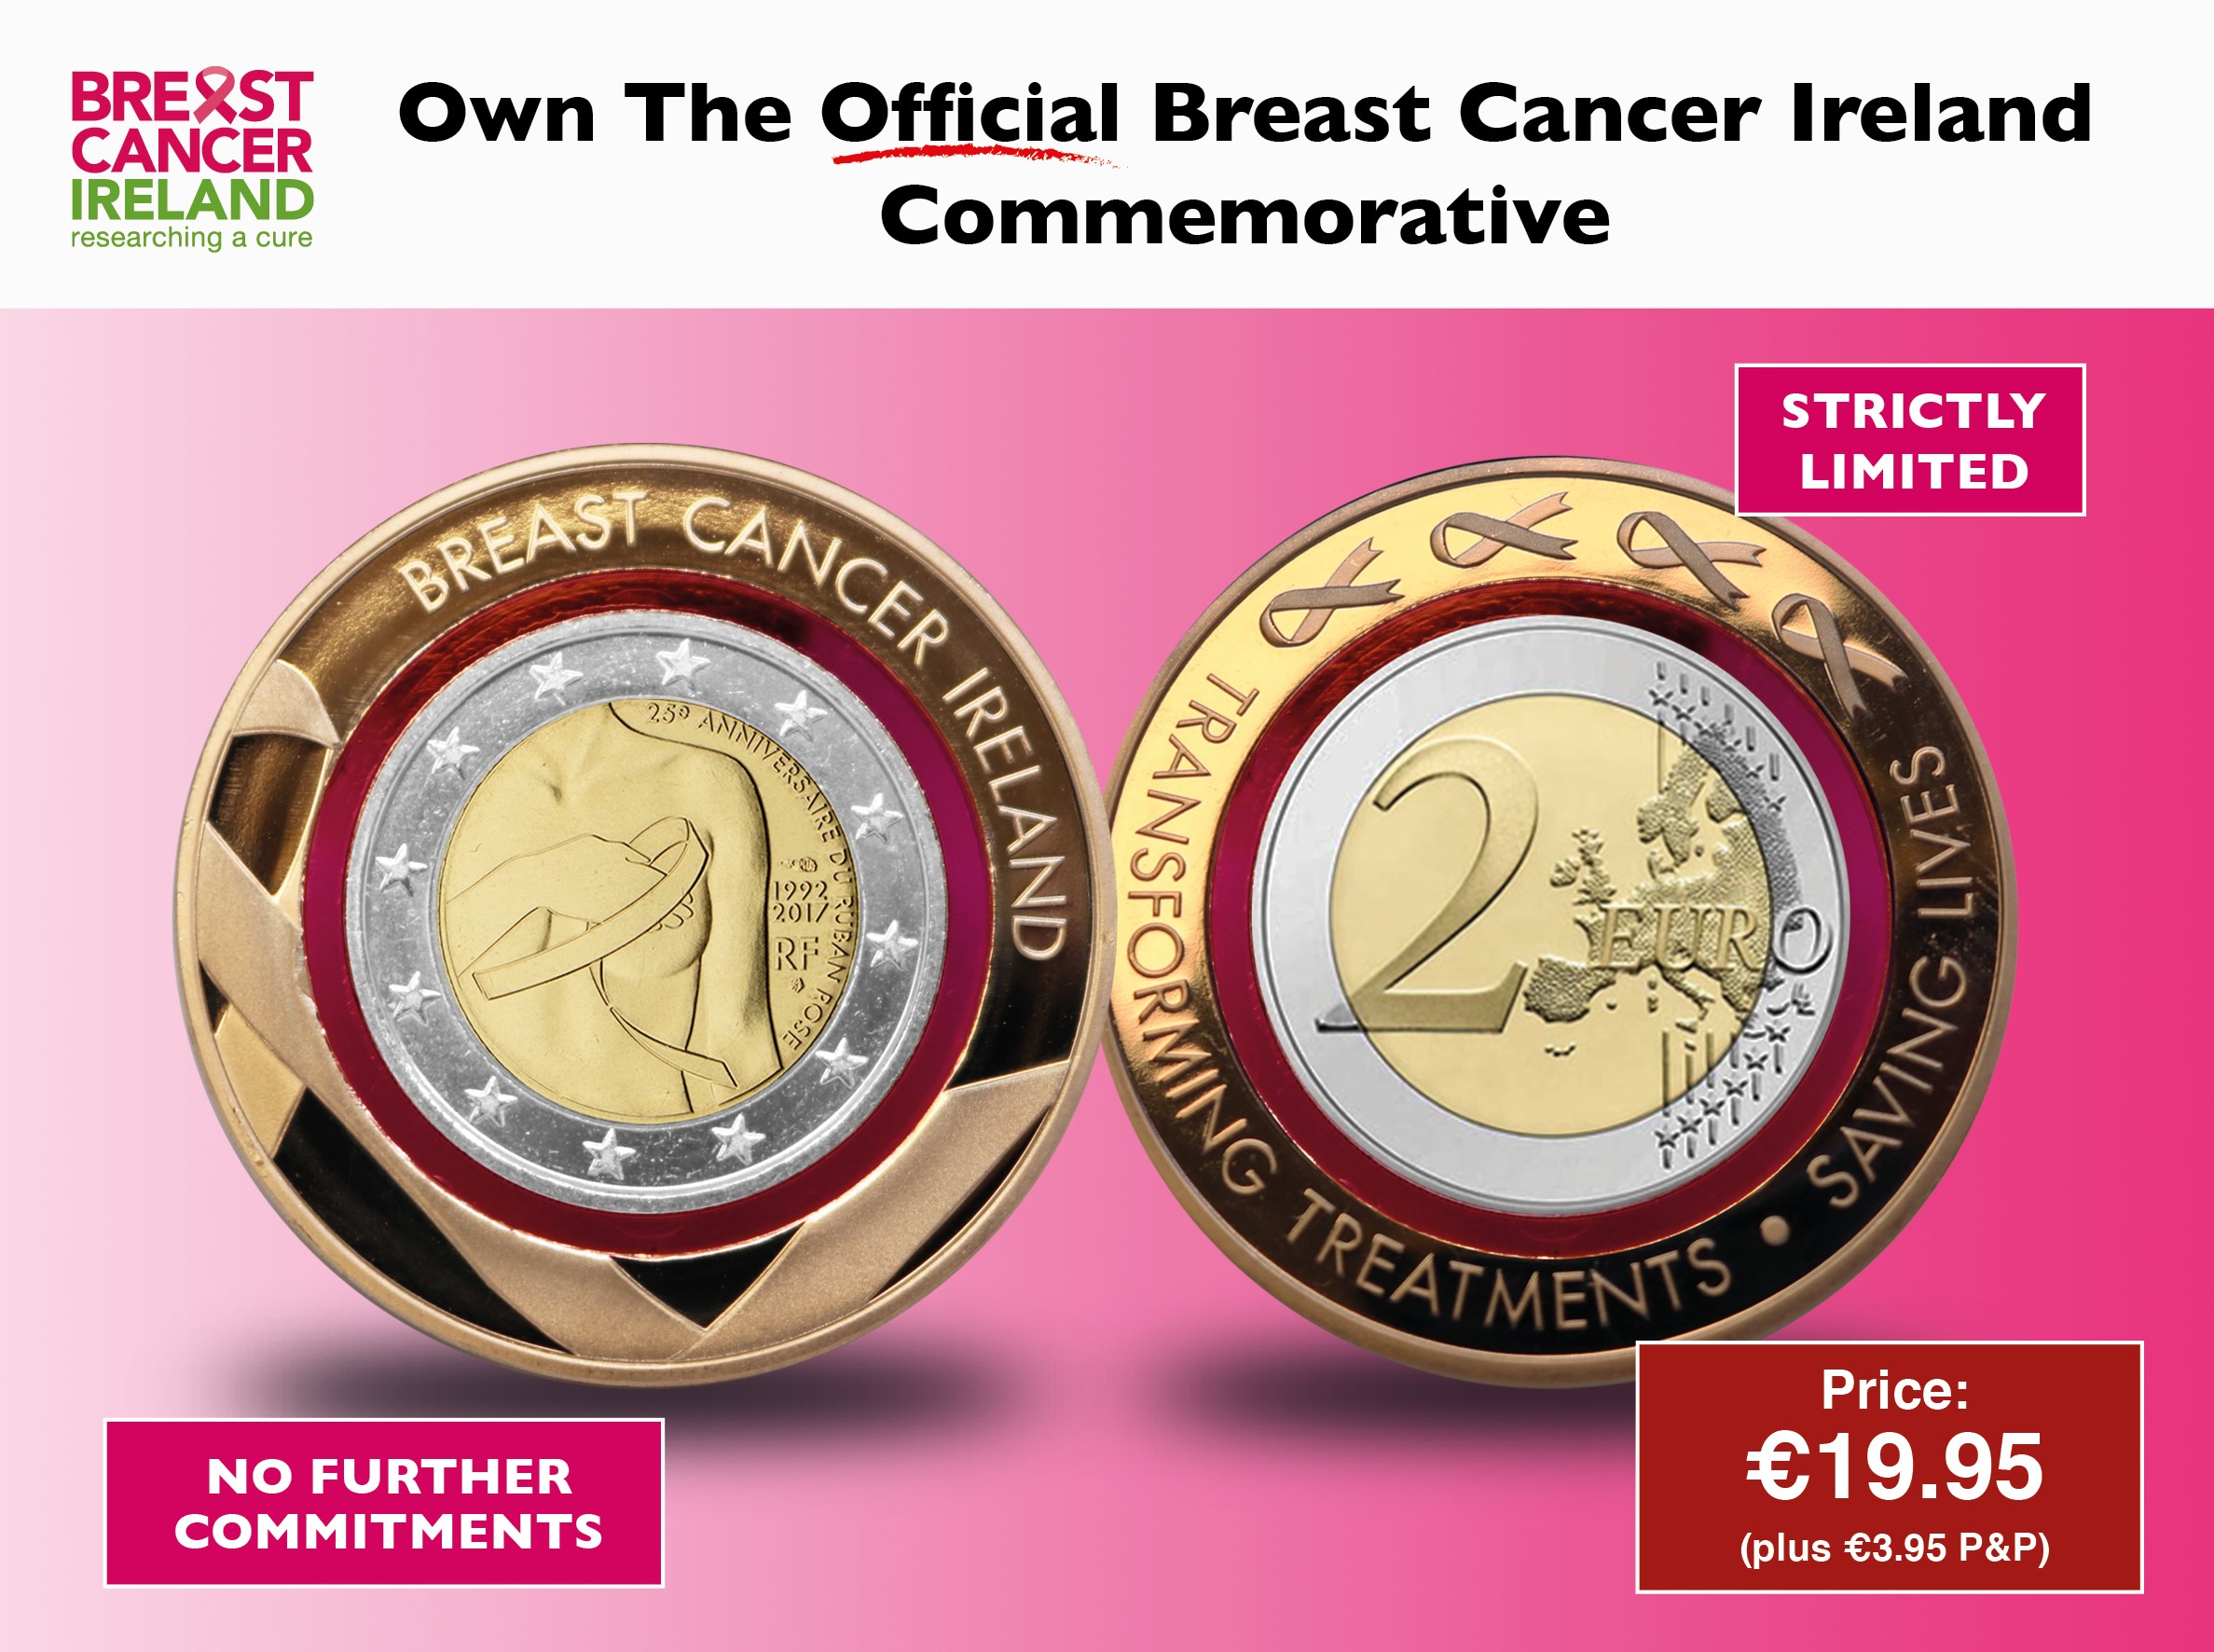 The Official Breast Cancer Ireland Commemorative